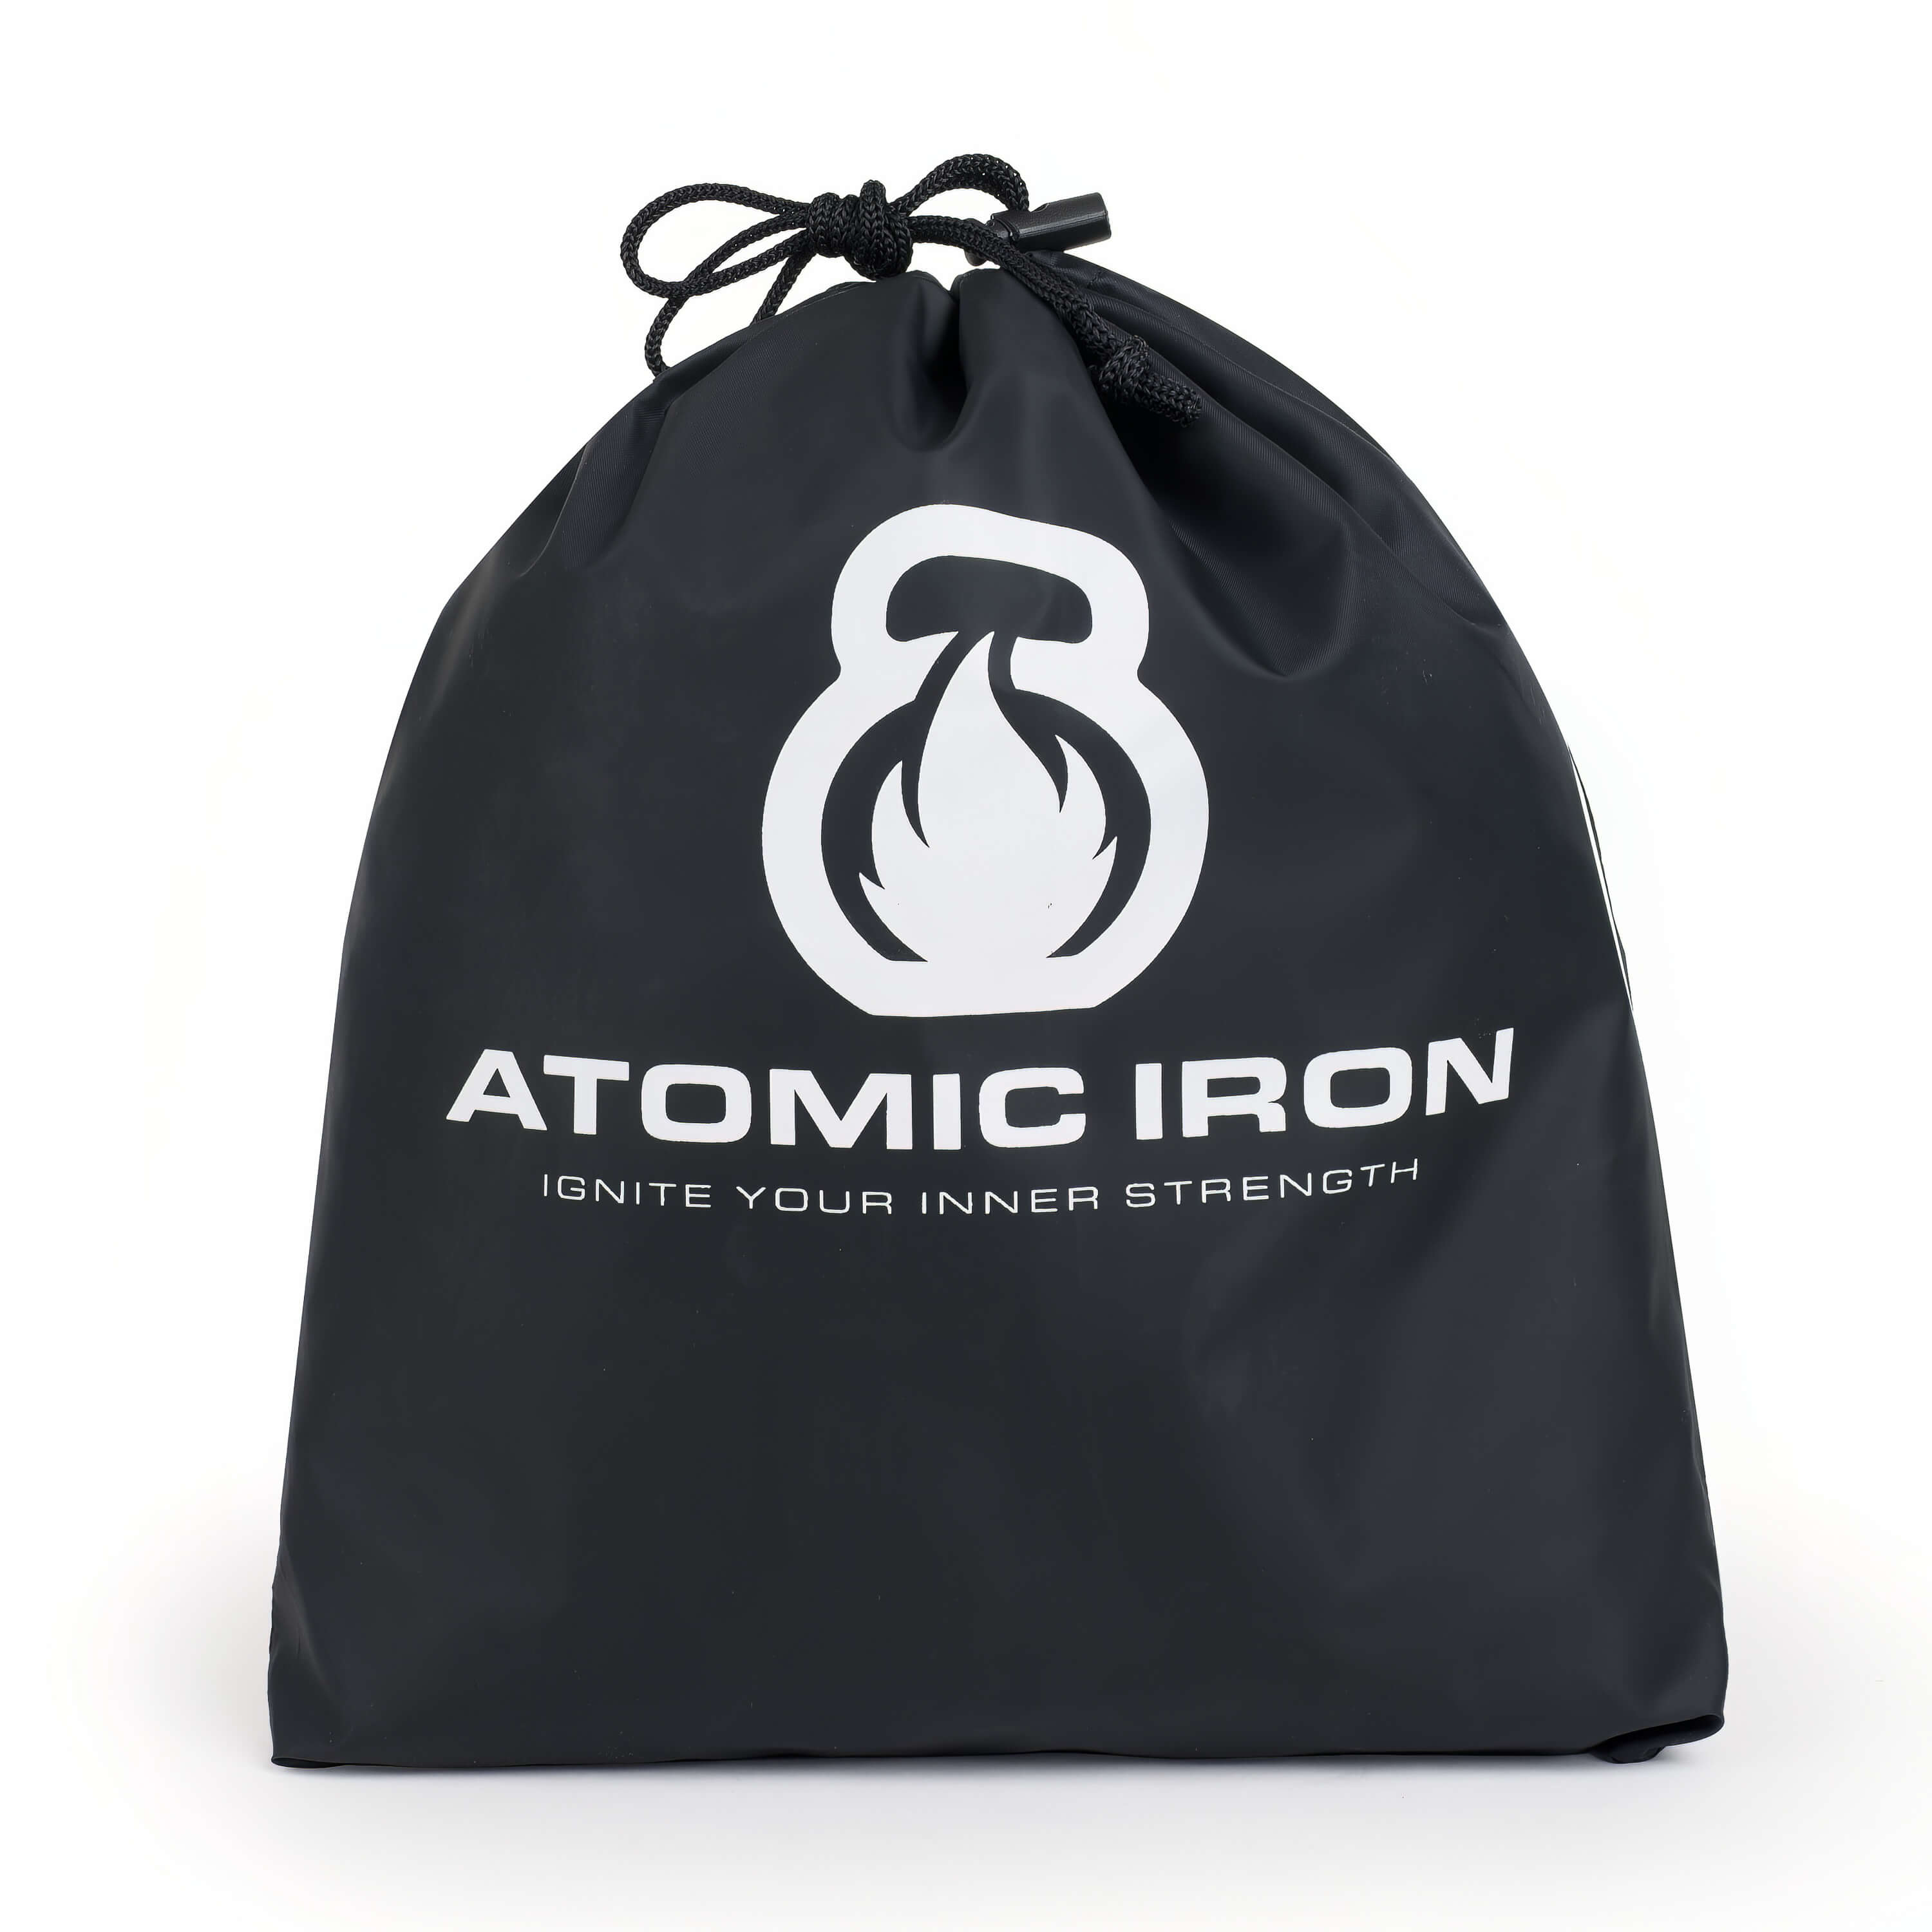 Sports bag for Gymnastic rings - Atomic Iron